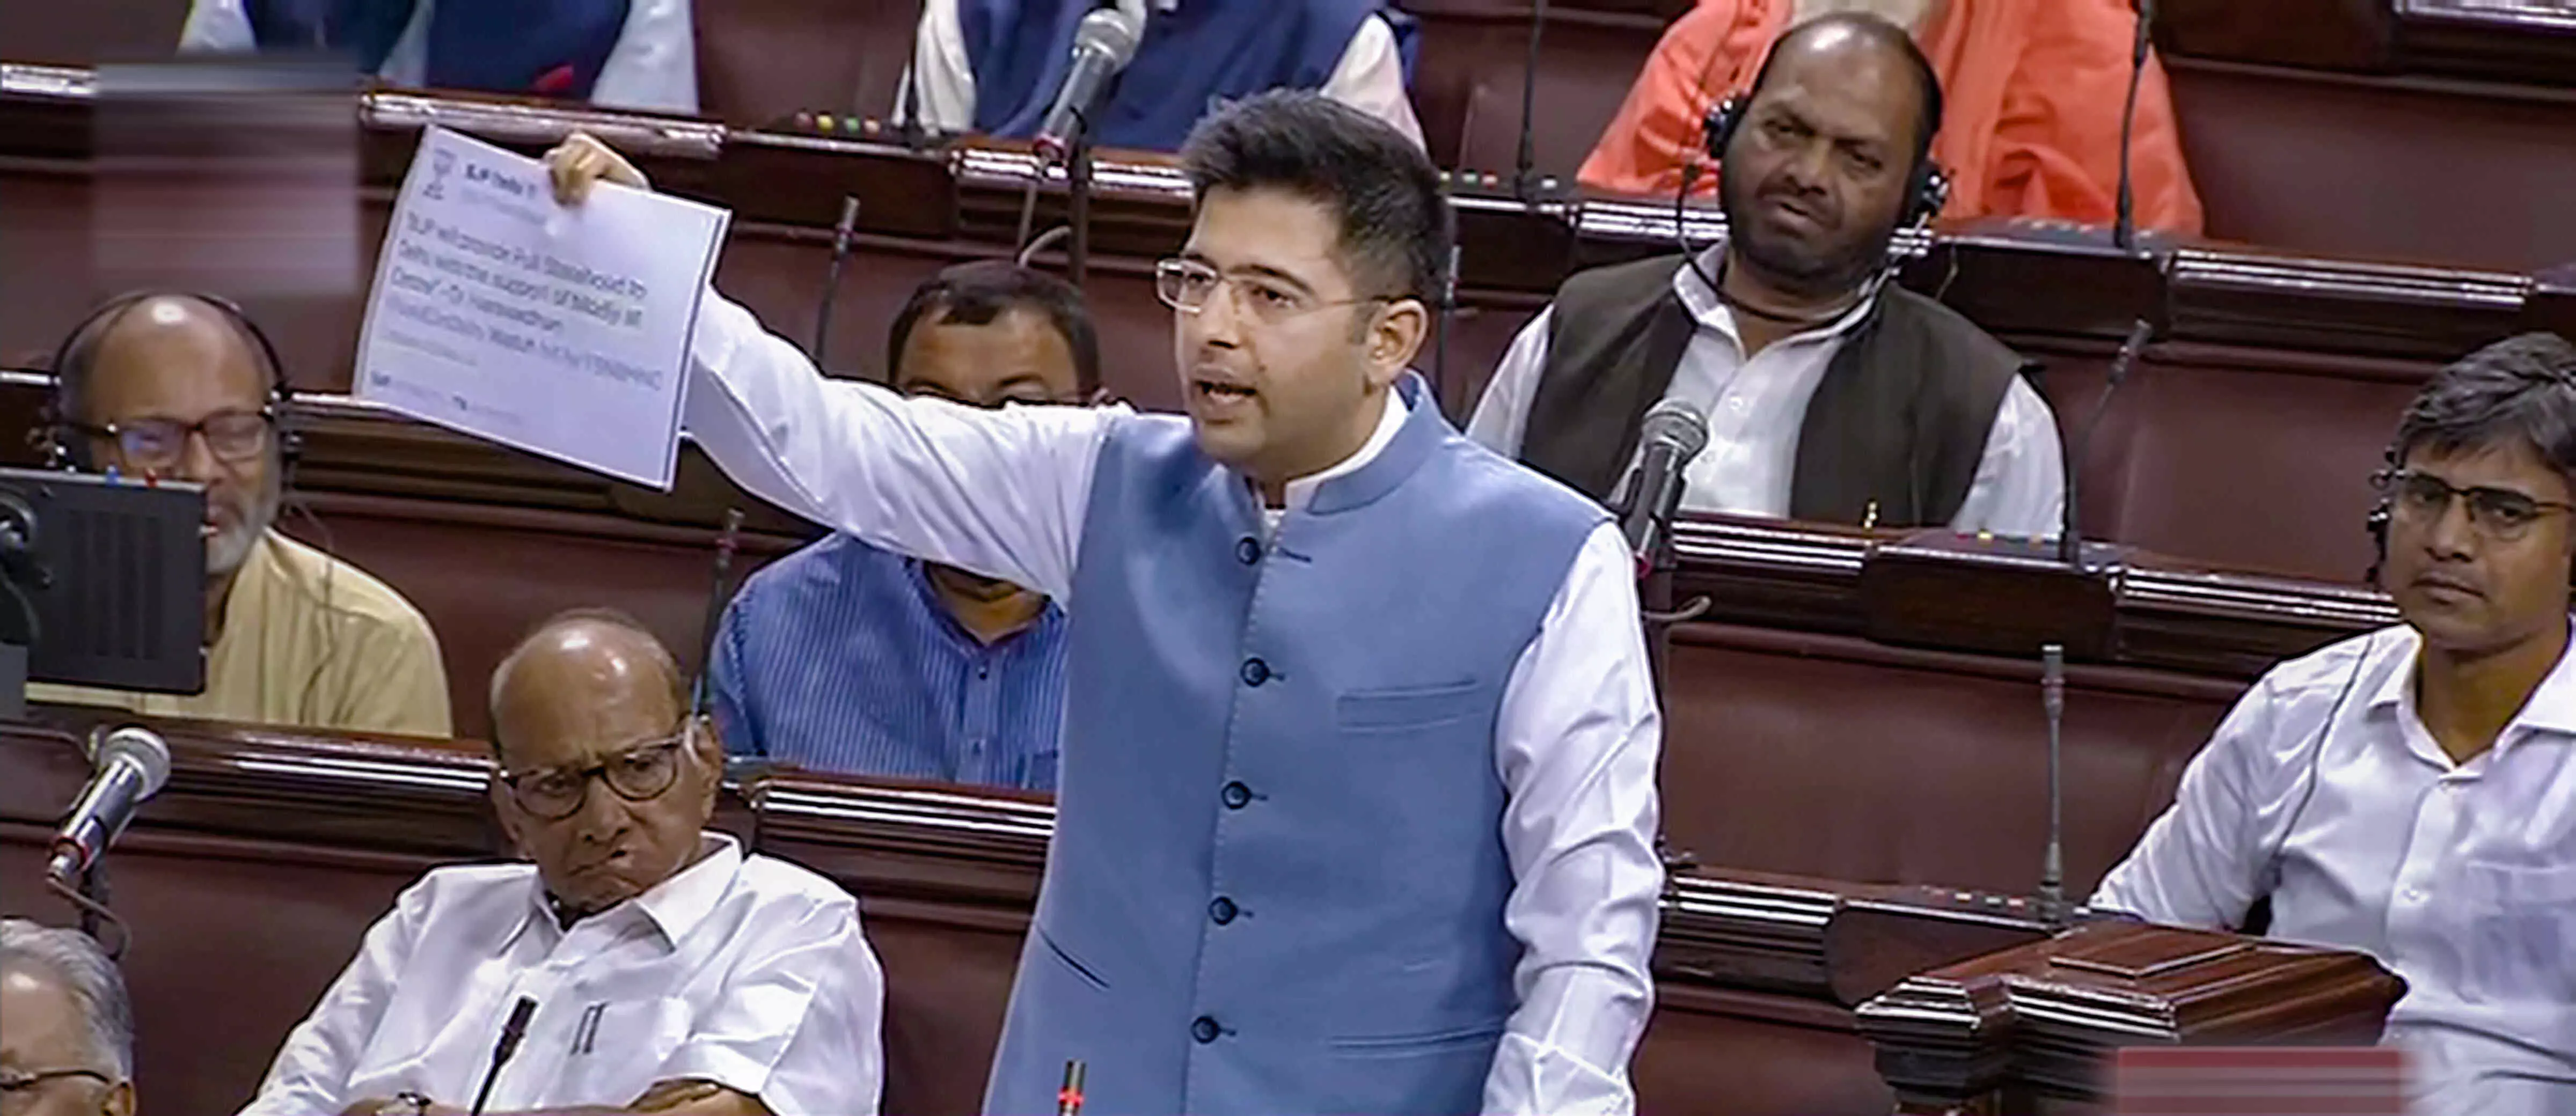 Delhi services bill a political fraud, constitutional sin aimed at taking away powers of elected govt: Raghav Chadha